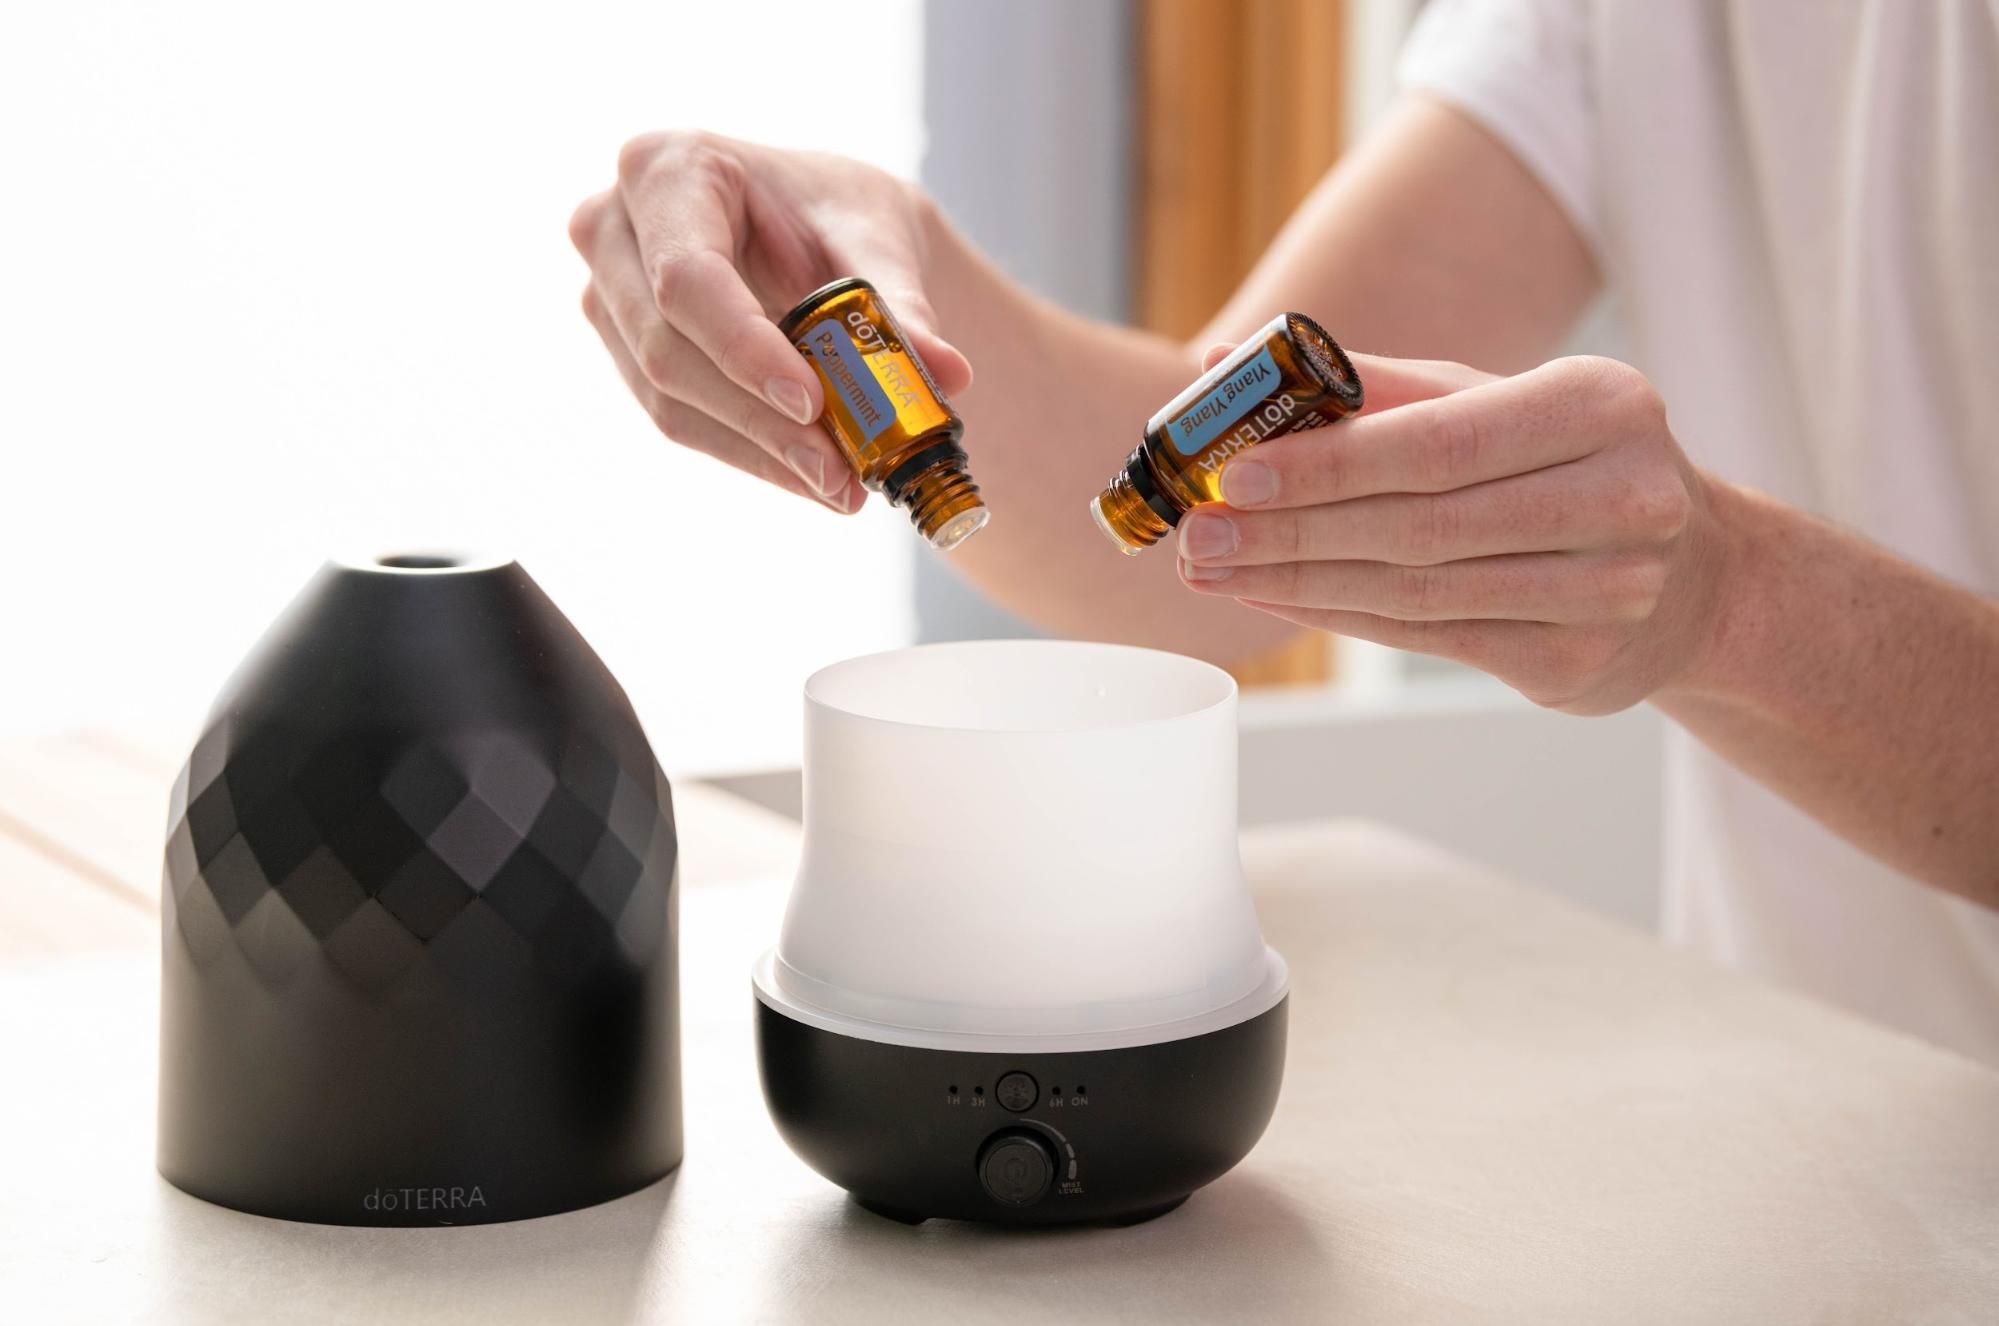 You Can Add Your Favorite Essential Oils To Its Water Tank